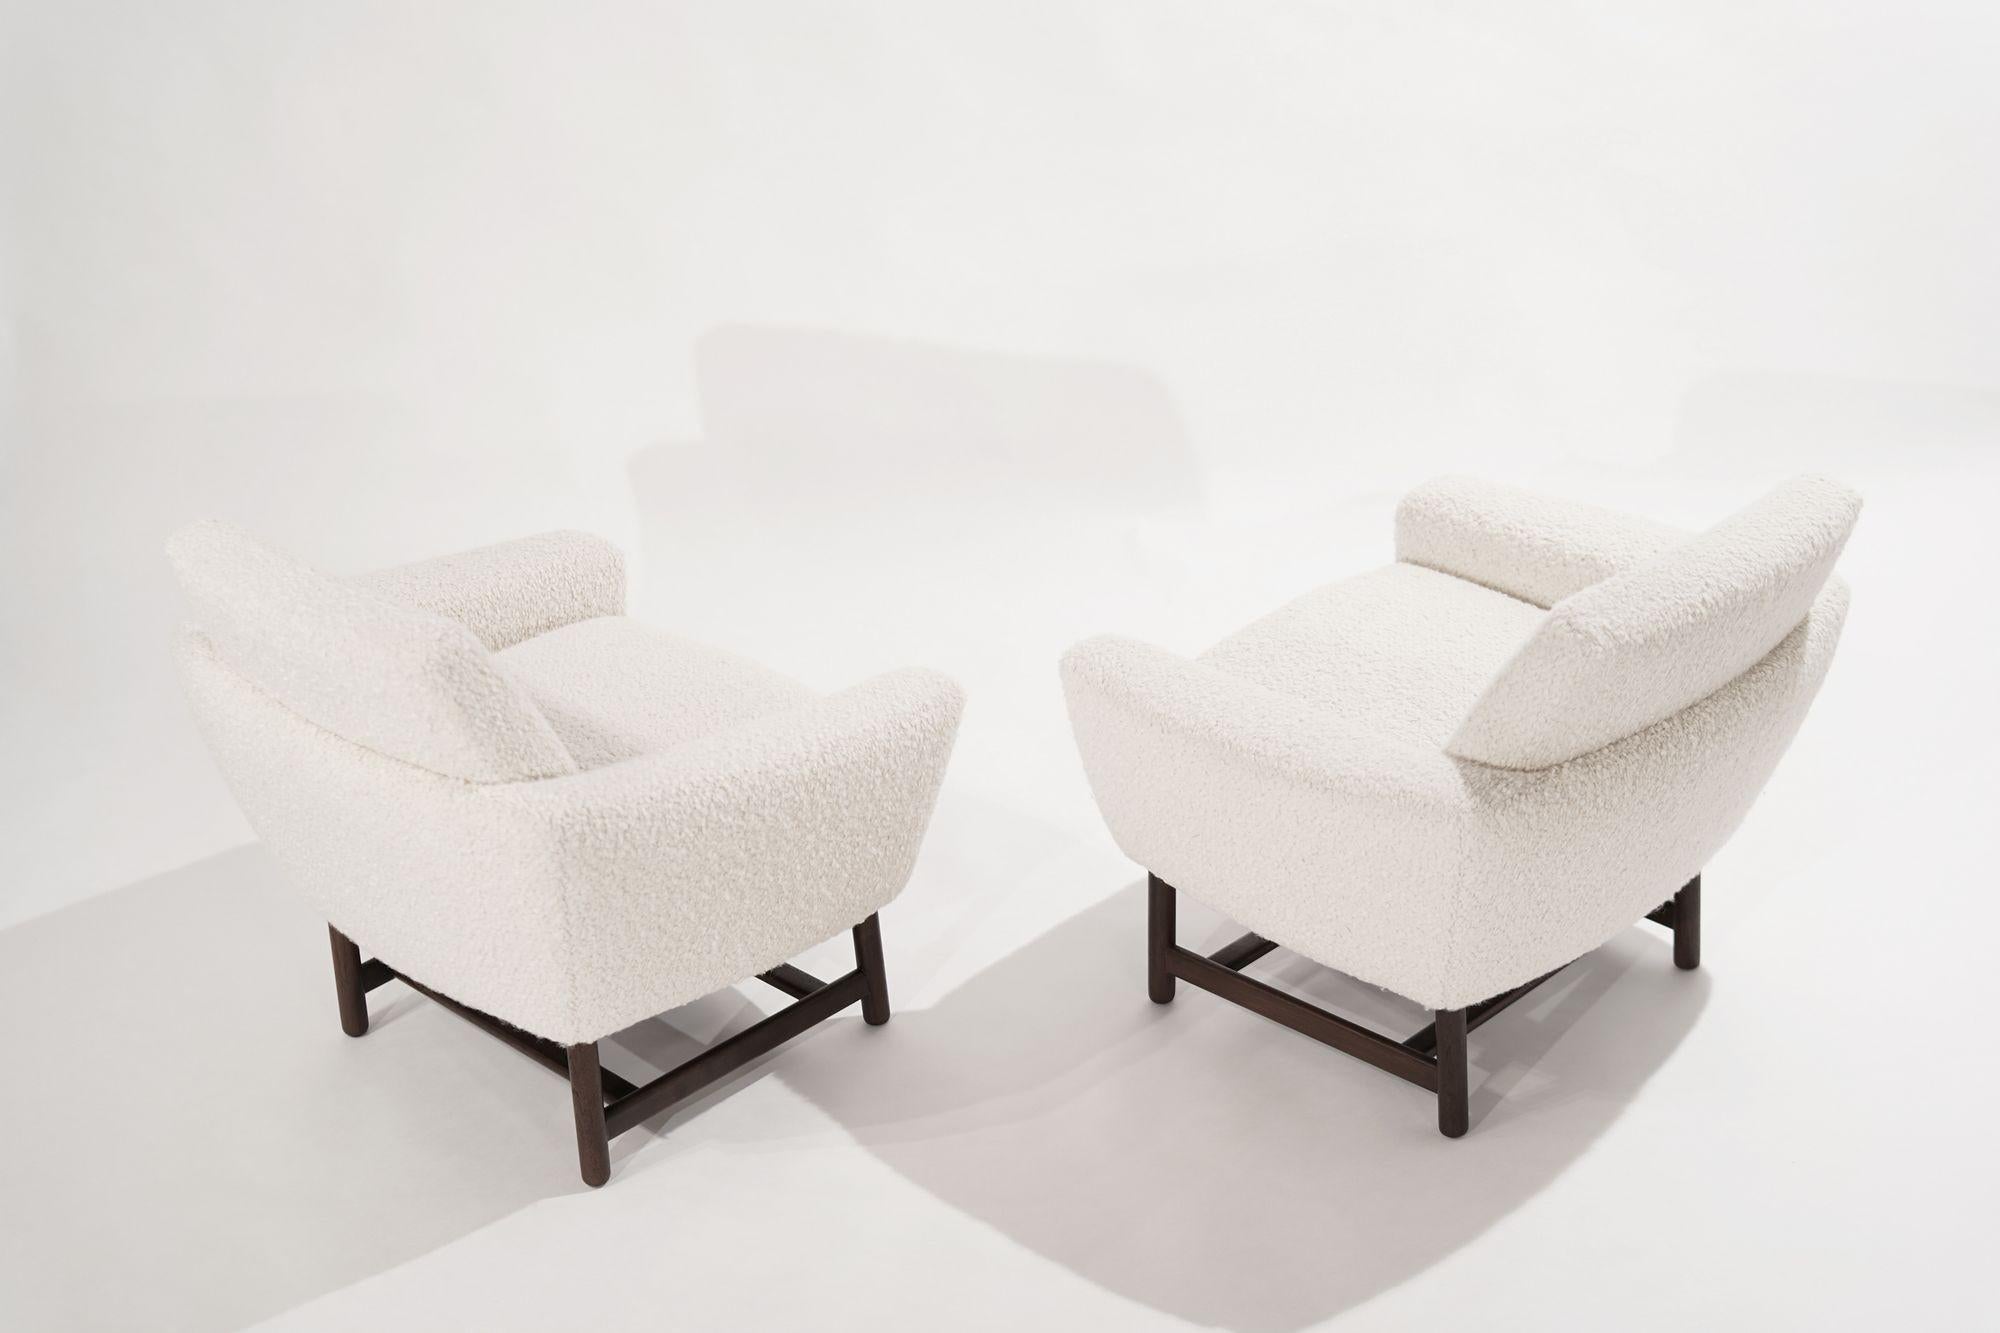 Danish Sculptural Low-Profile Lounge Chairs in Bouclé, Denmark, 1950s For Sale